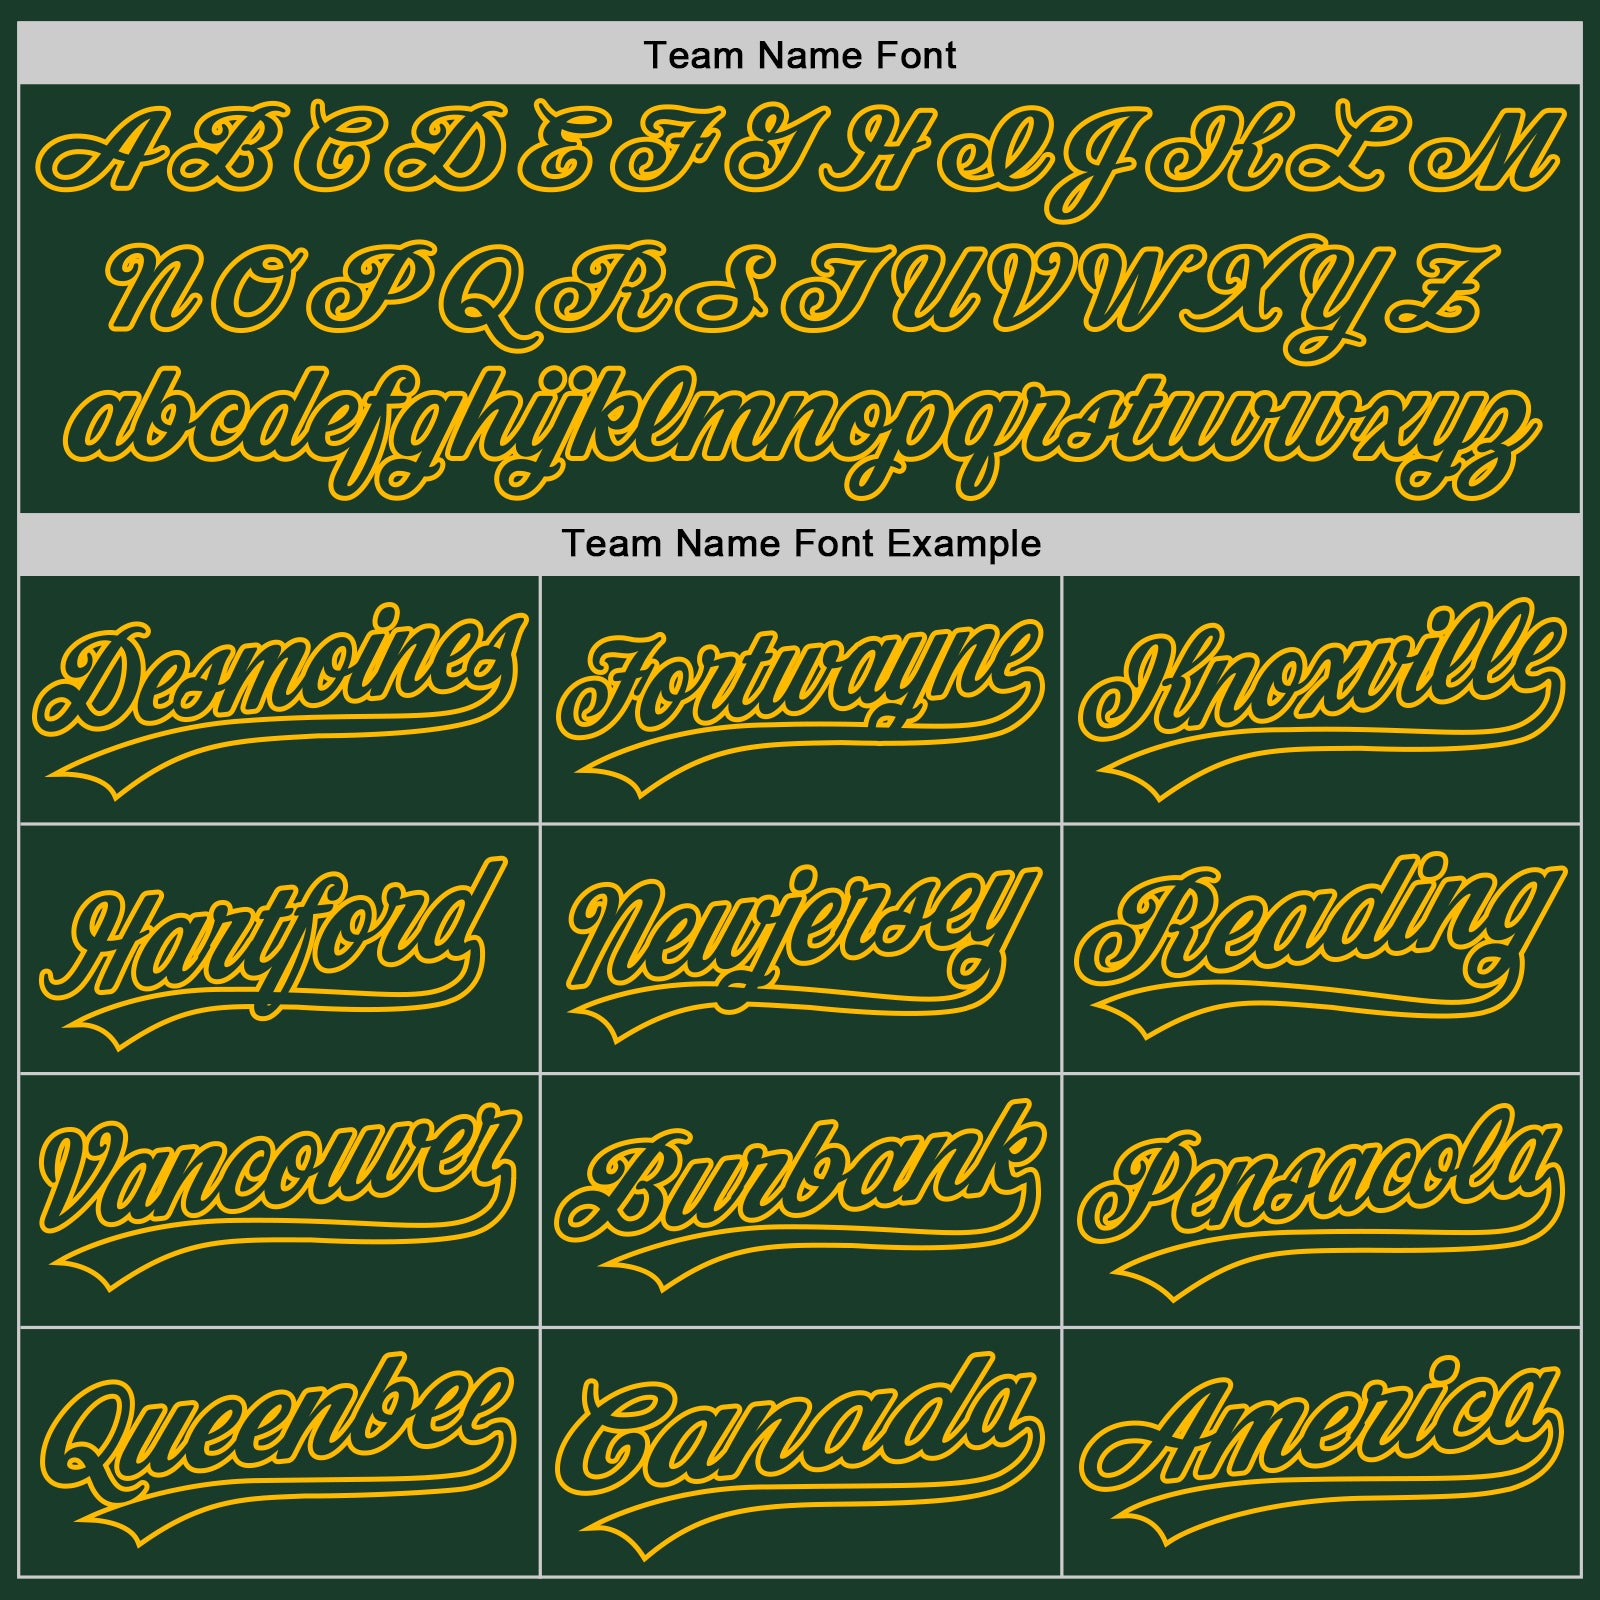 Custom Green Gold 3D Pattern Design Abstract Network Authentic Baseball Jersey